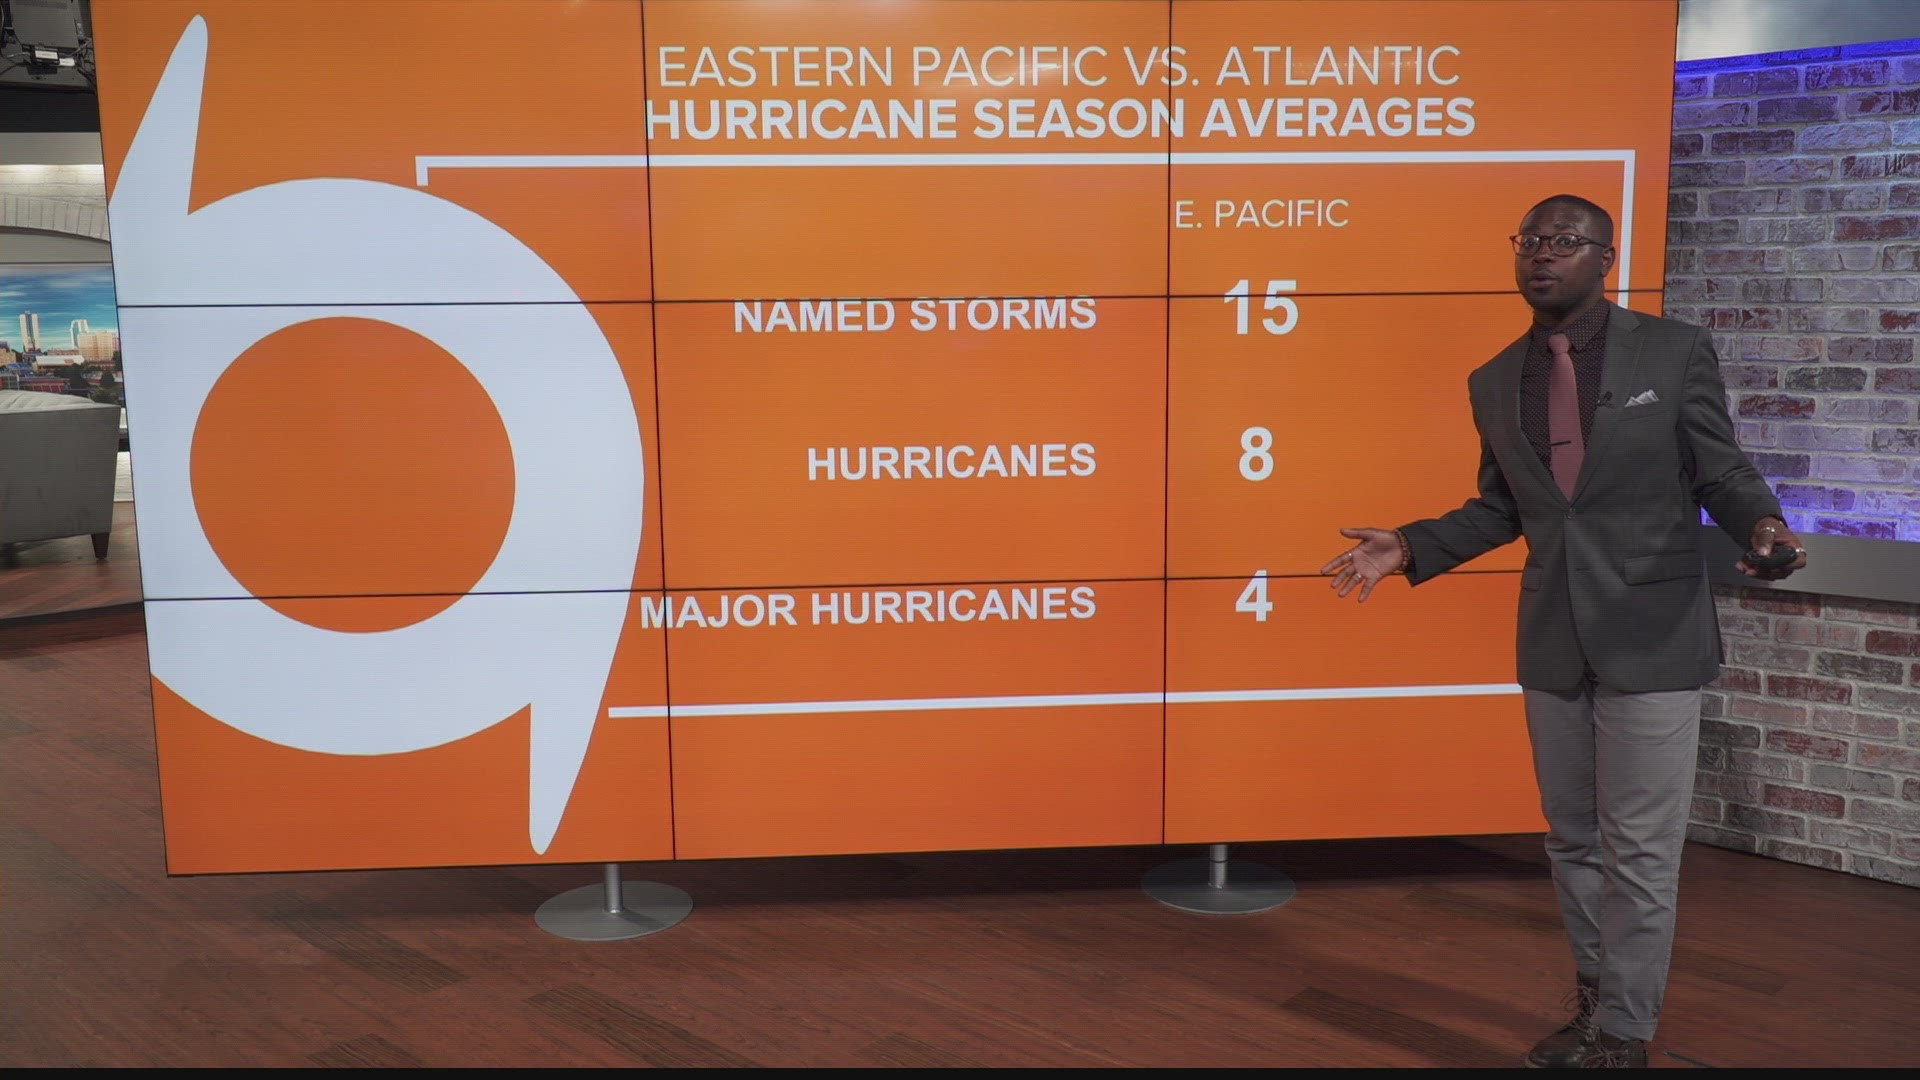 Usually lying in the shadow of Atlantic hurricane season, the Eastern Pacific hurricane season starts earlier in mid-May. It could later affect the U.S. Southwest.